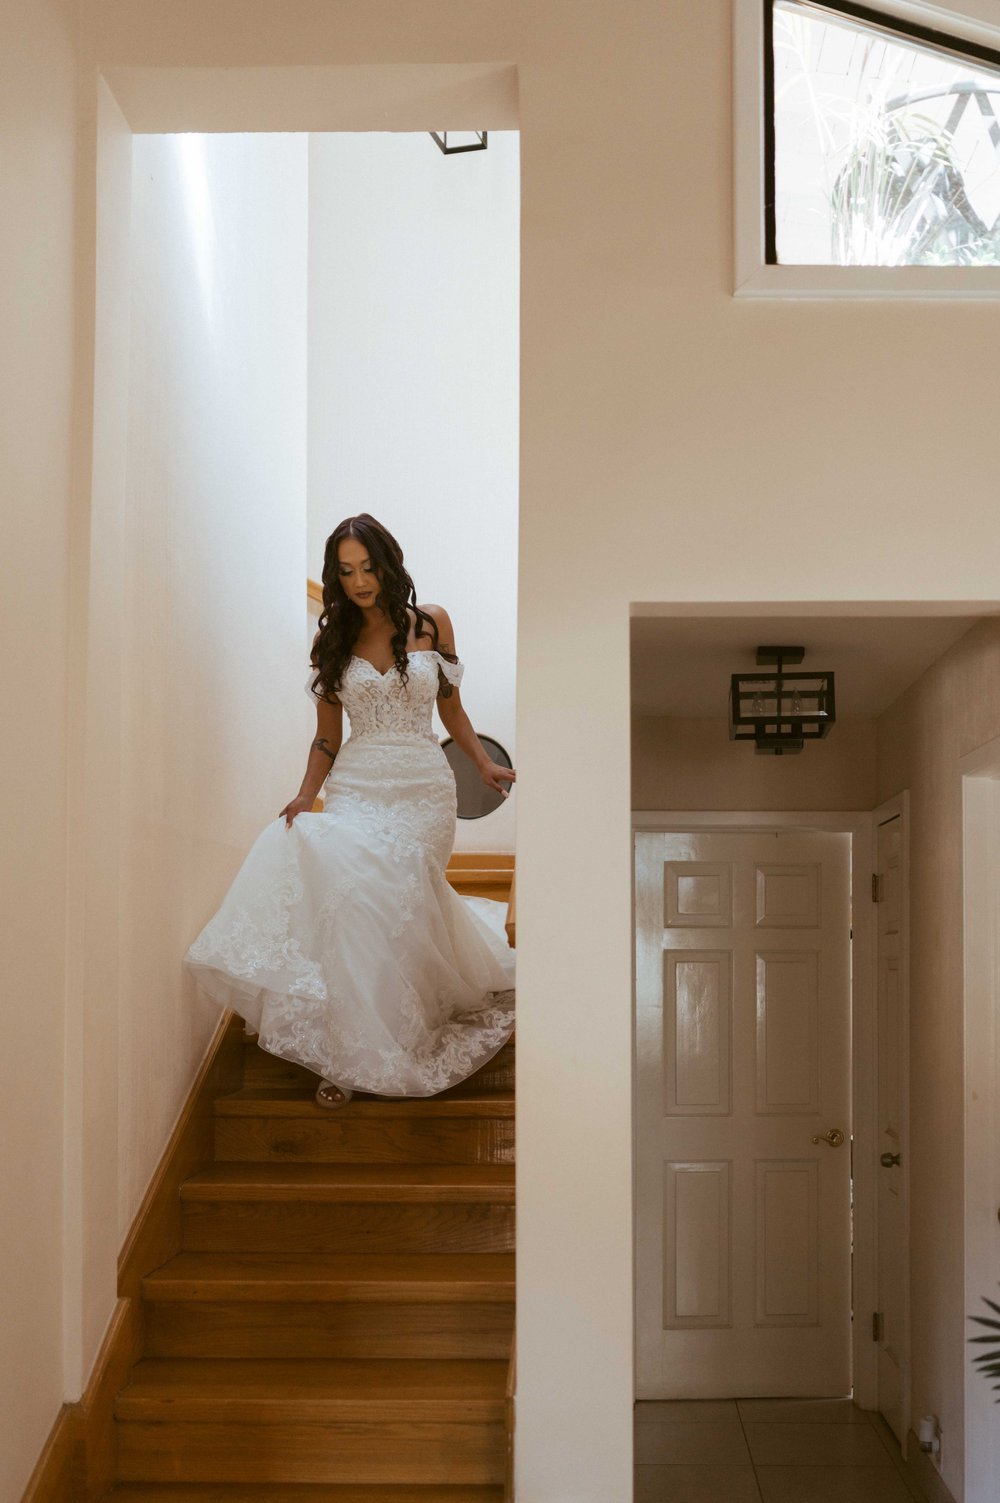 wedding bride walking down stairs valle de guadalupe mexico